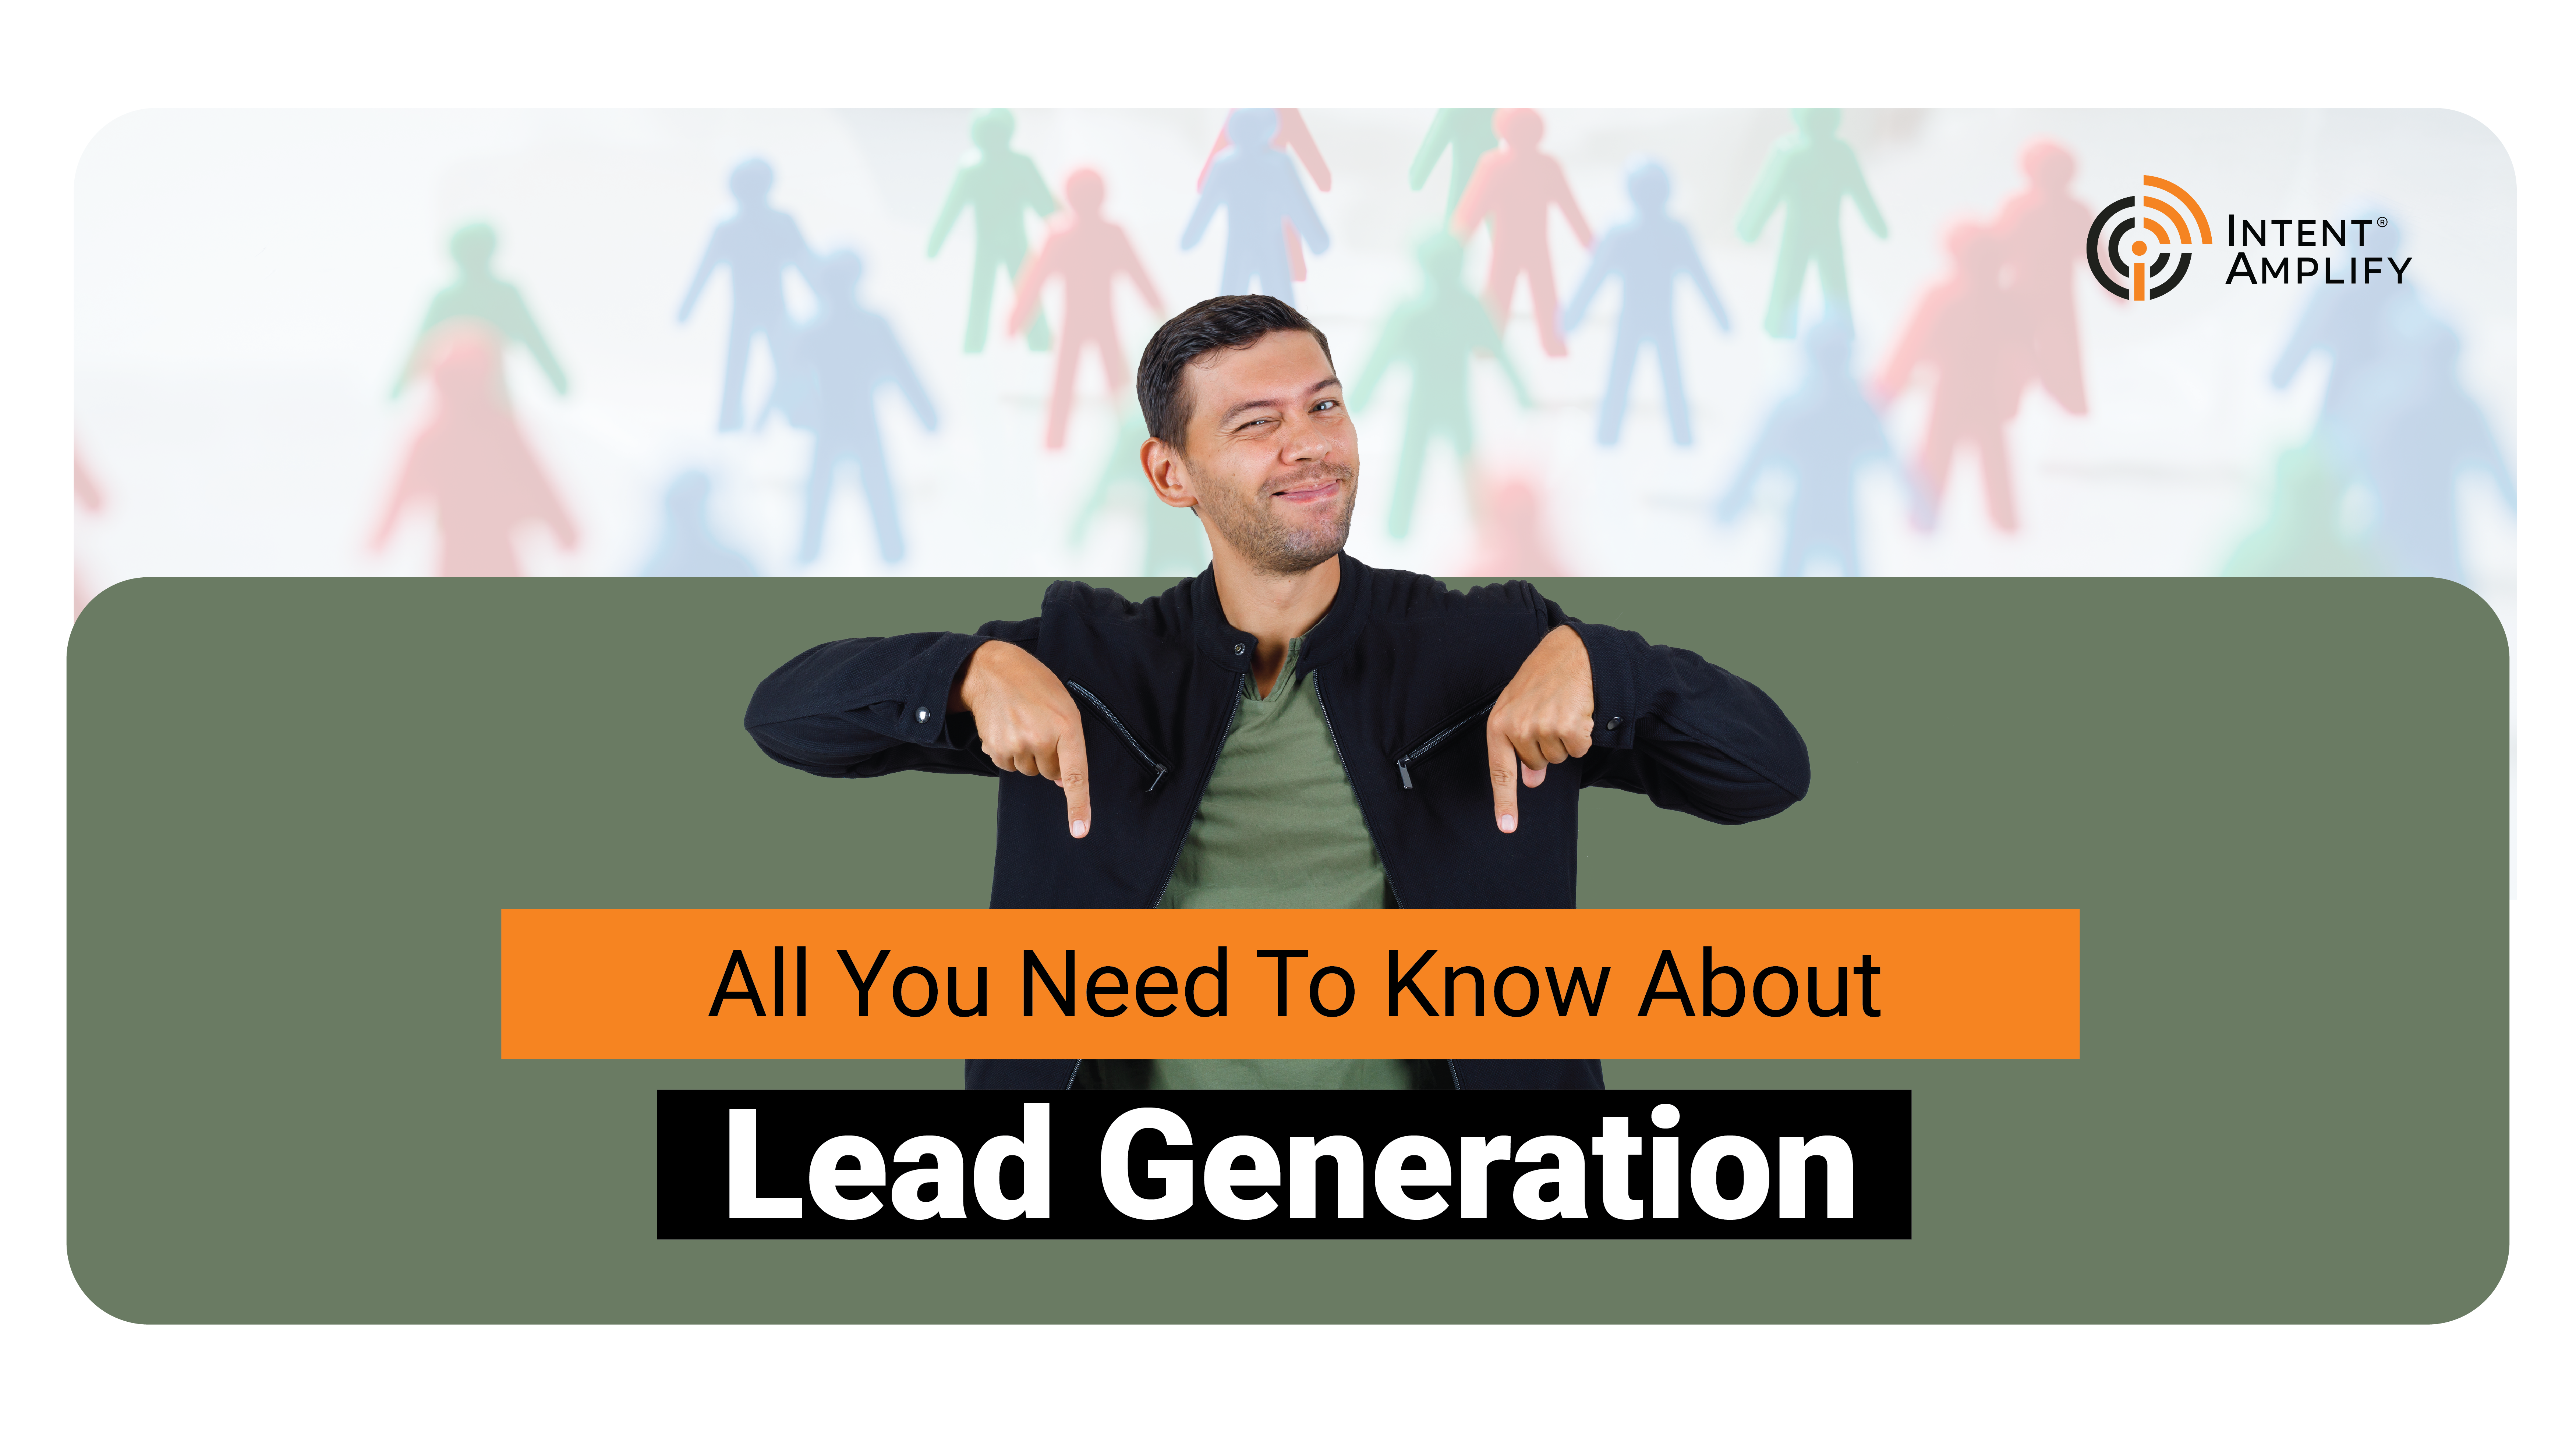 All you need to know about lead generation